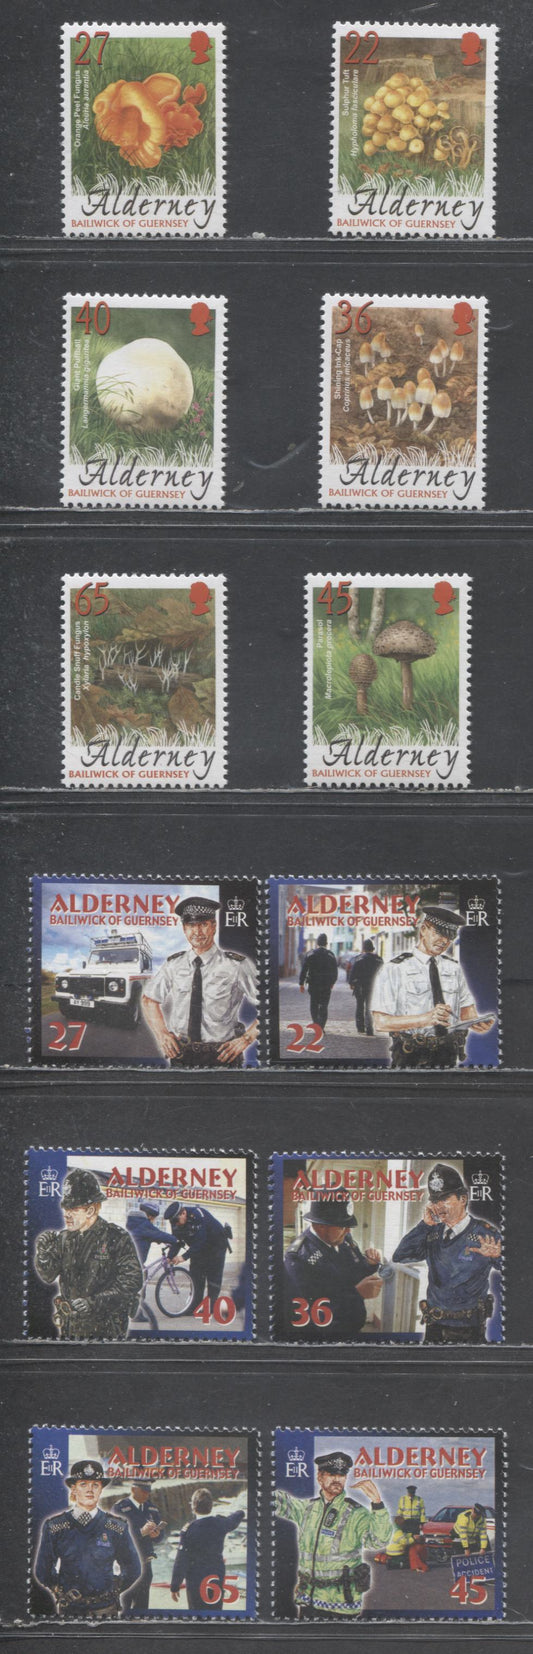 Lot 216 Alderney SC#215-226 2003-2004 Police & Fungi Issues, 12 VFNH Singles, Click on Listing to See ALL Pictures, 2017 Scott Cat. $18.2